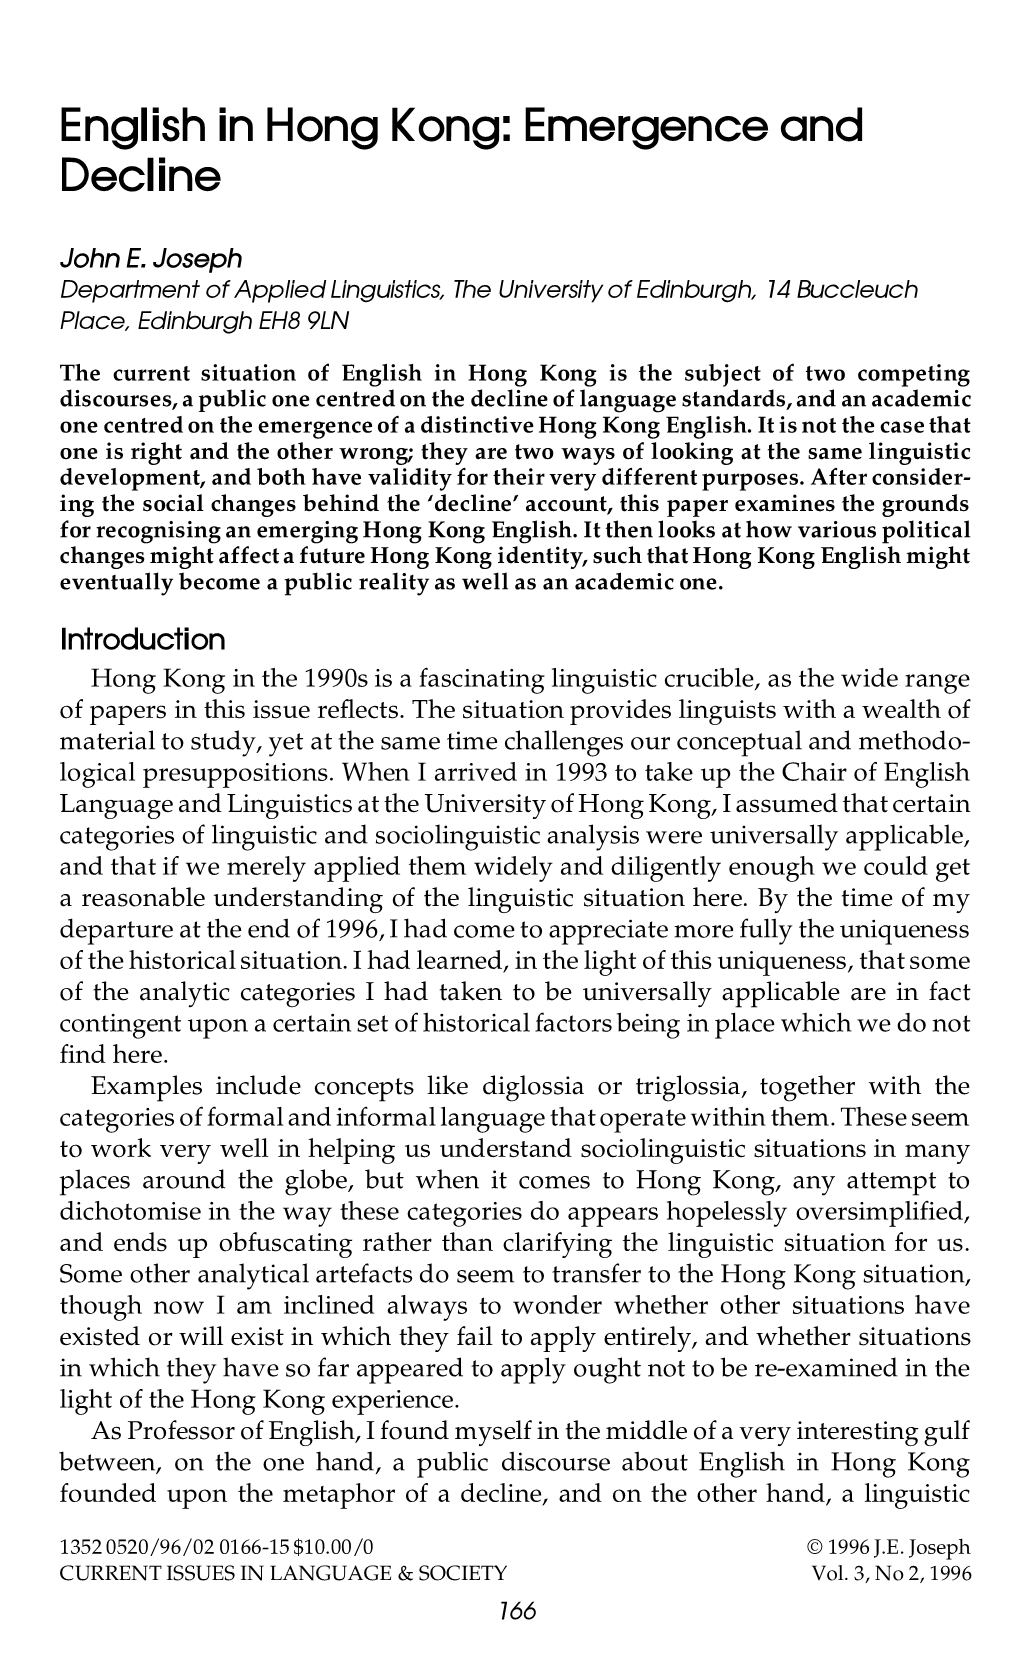 English in Hong Kong: Emergence and Decline